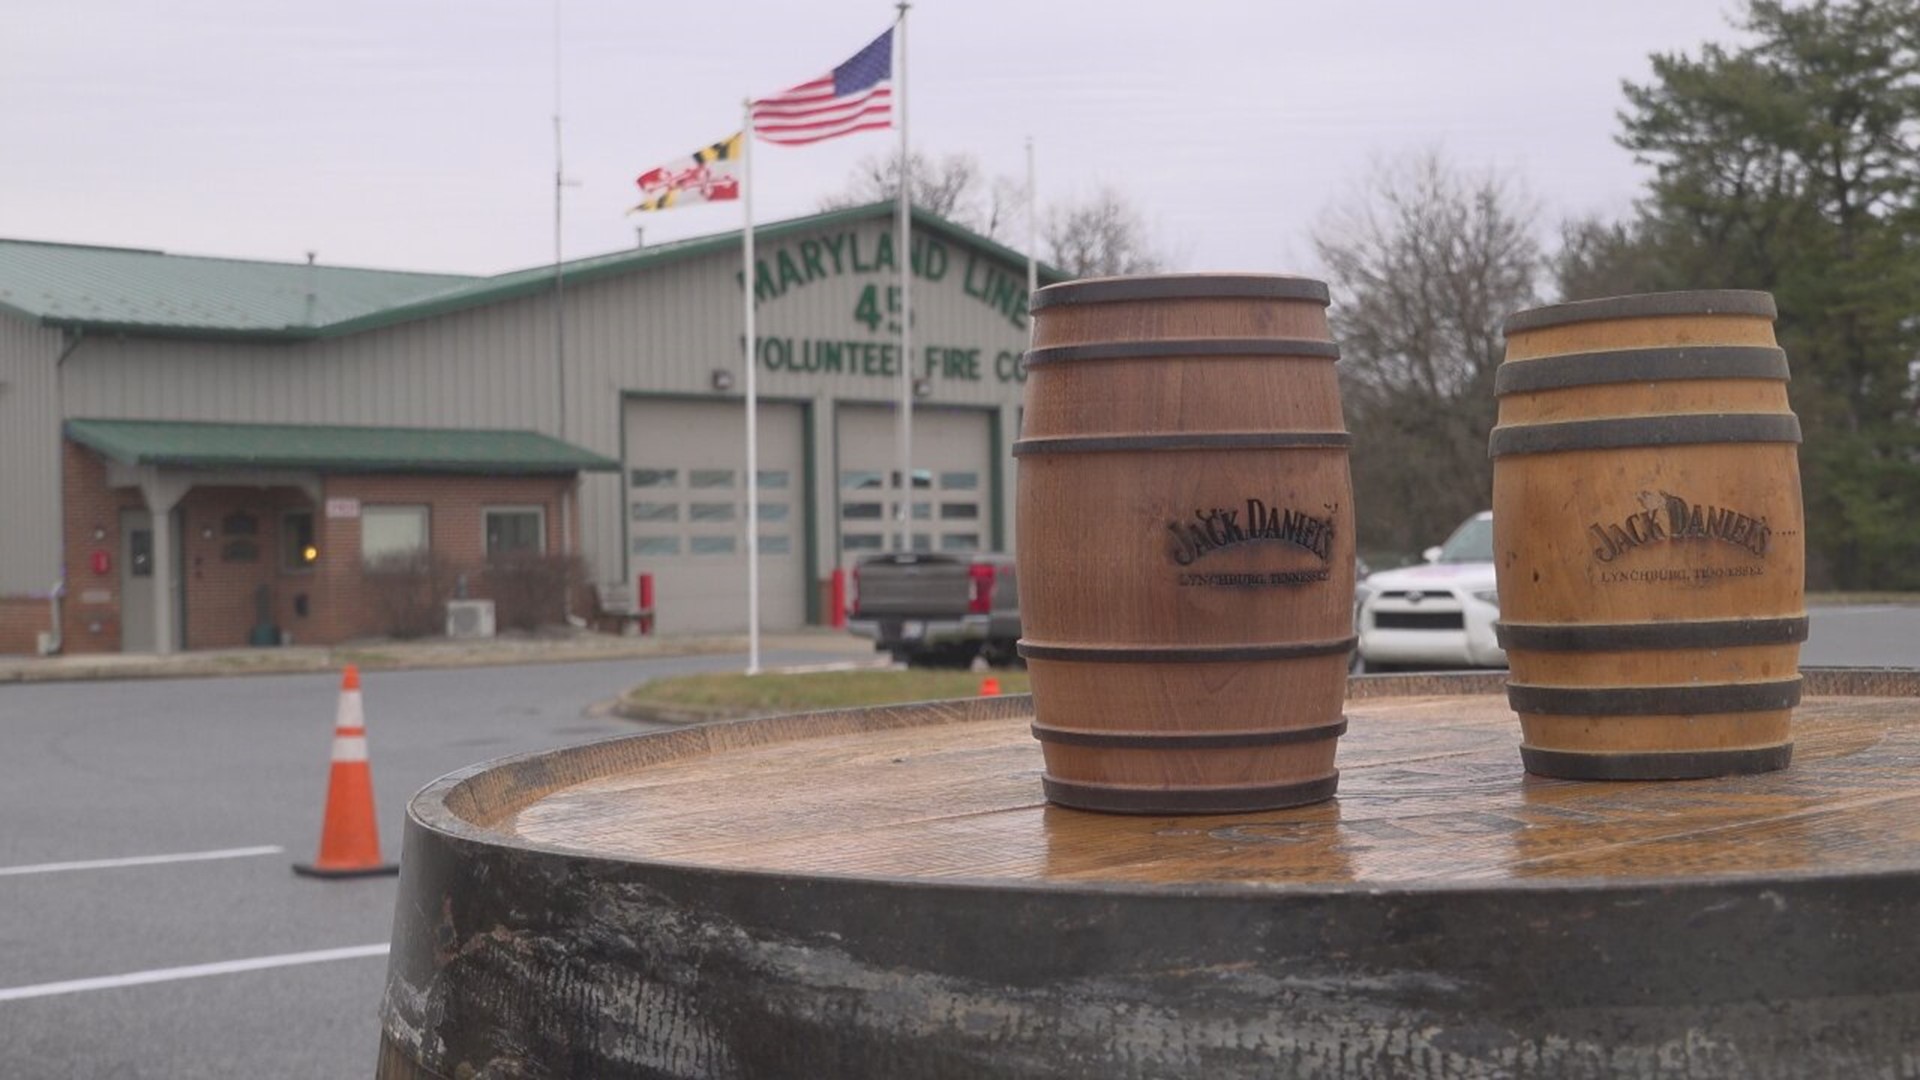 Dave Stang organizes an event that sells refurbished and repurposed whisky barrels with all proceeds supporting Penn-Mar Human Services.